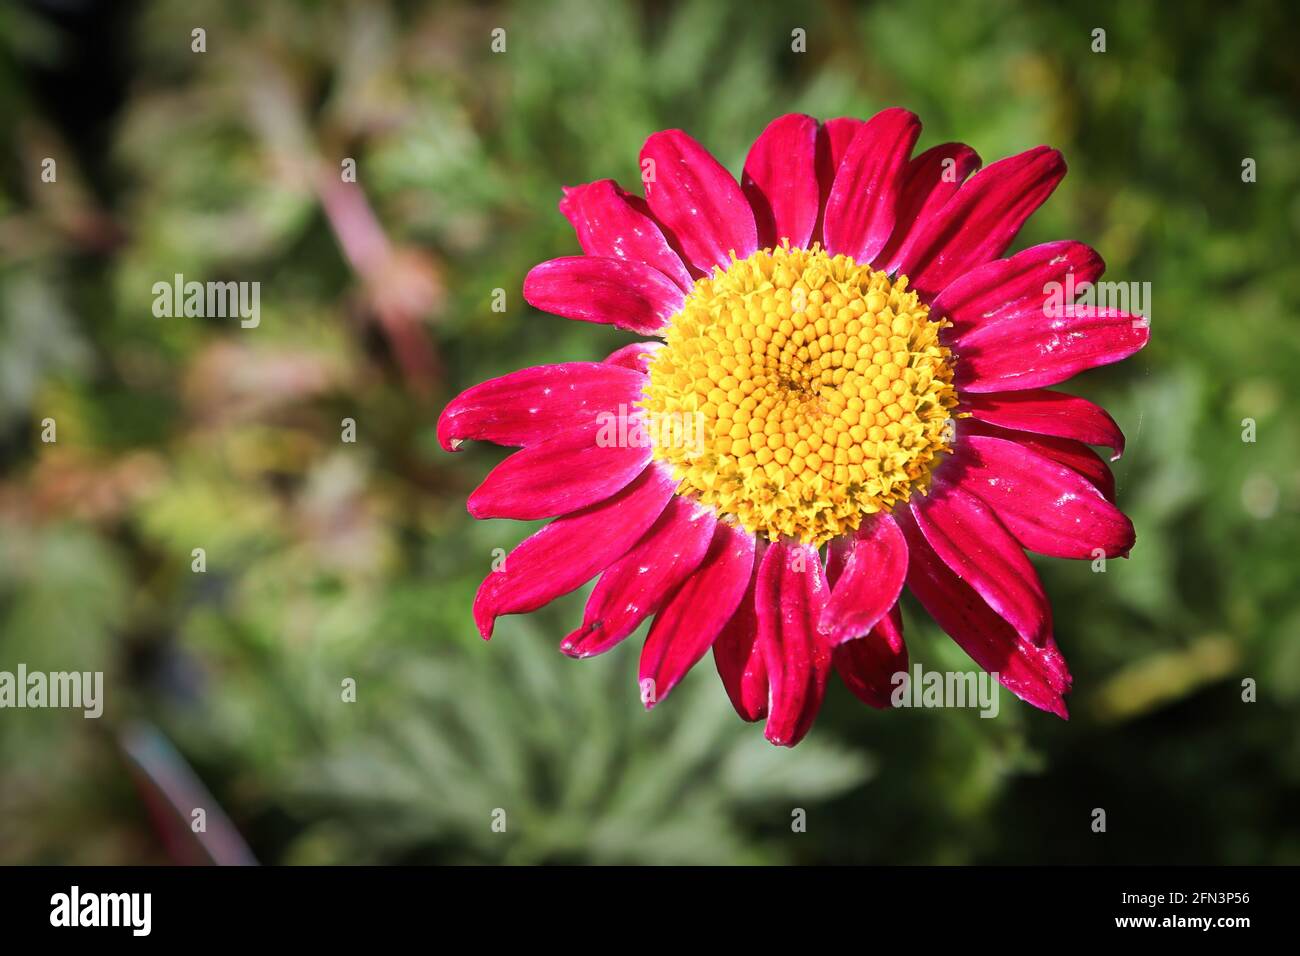 Background of a painted daisy flower bloom Stock Photo